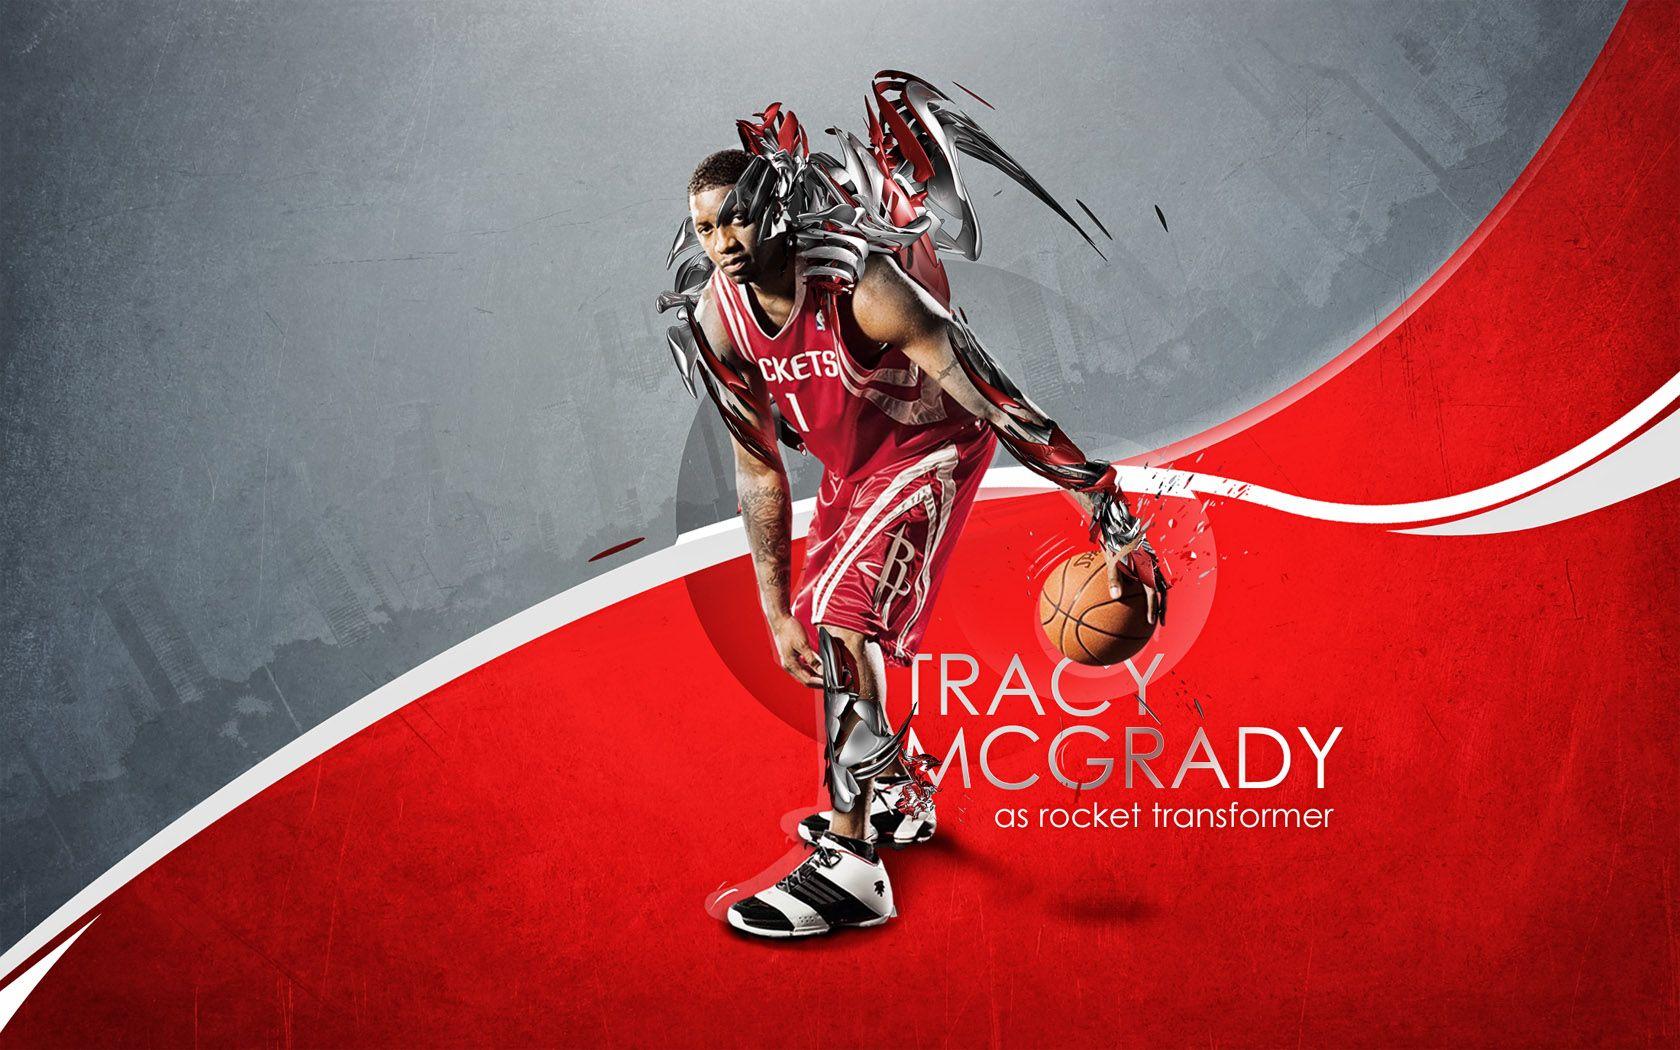 Simple widescreen wallpaper of Tracy McGrady in Spurs uniform for